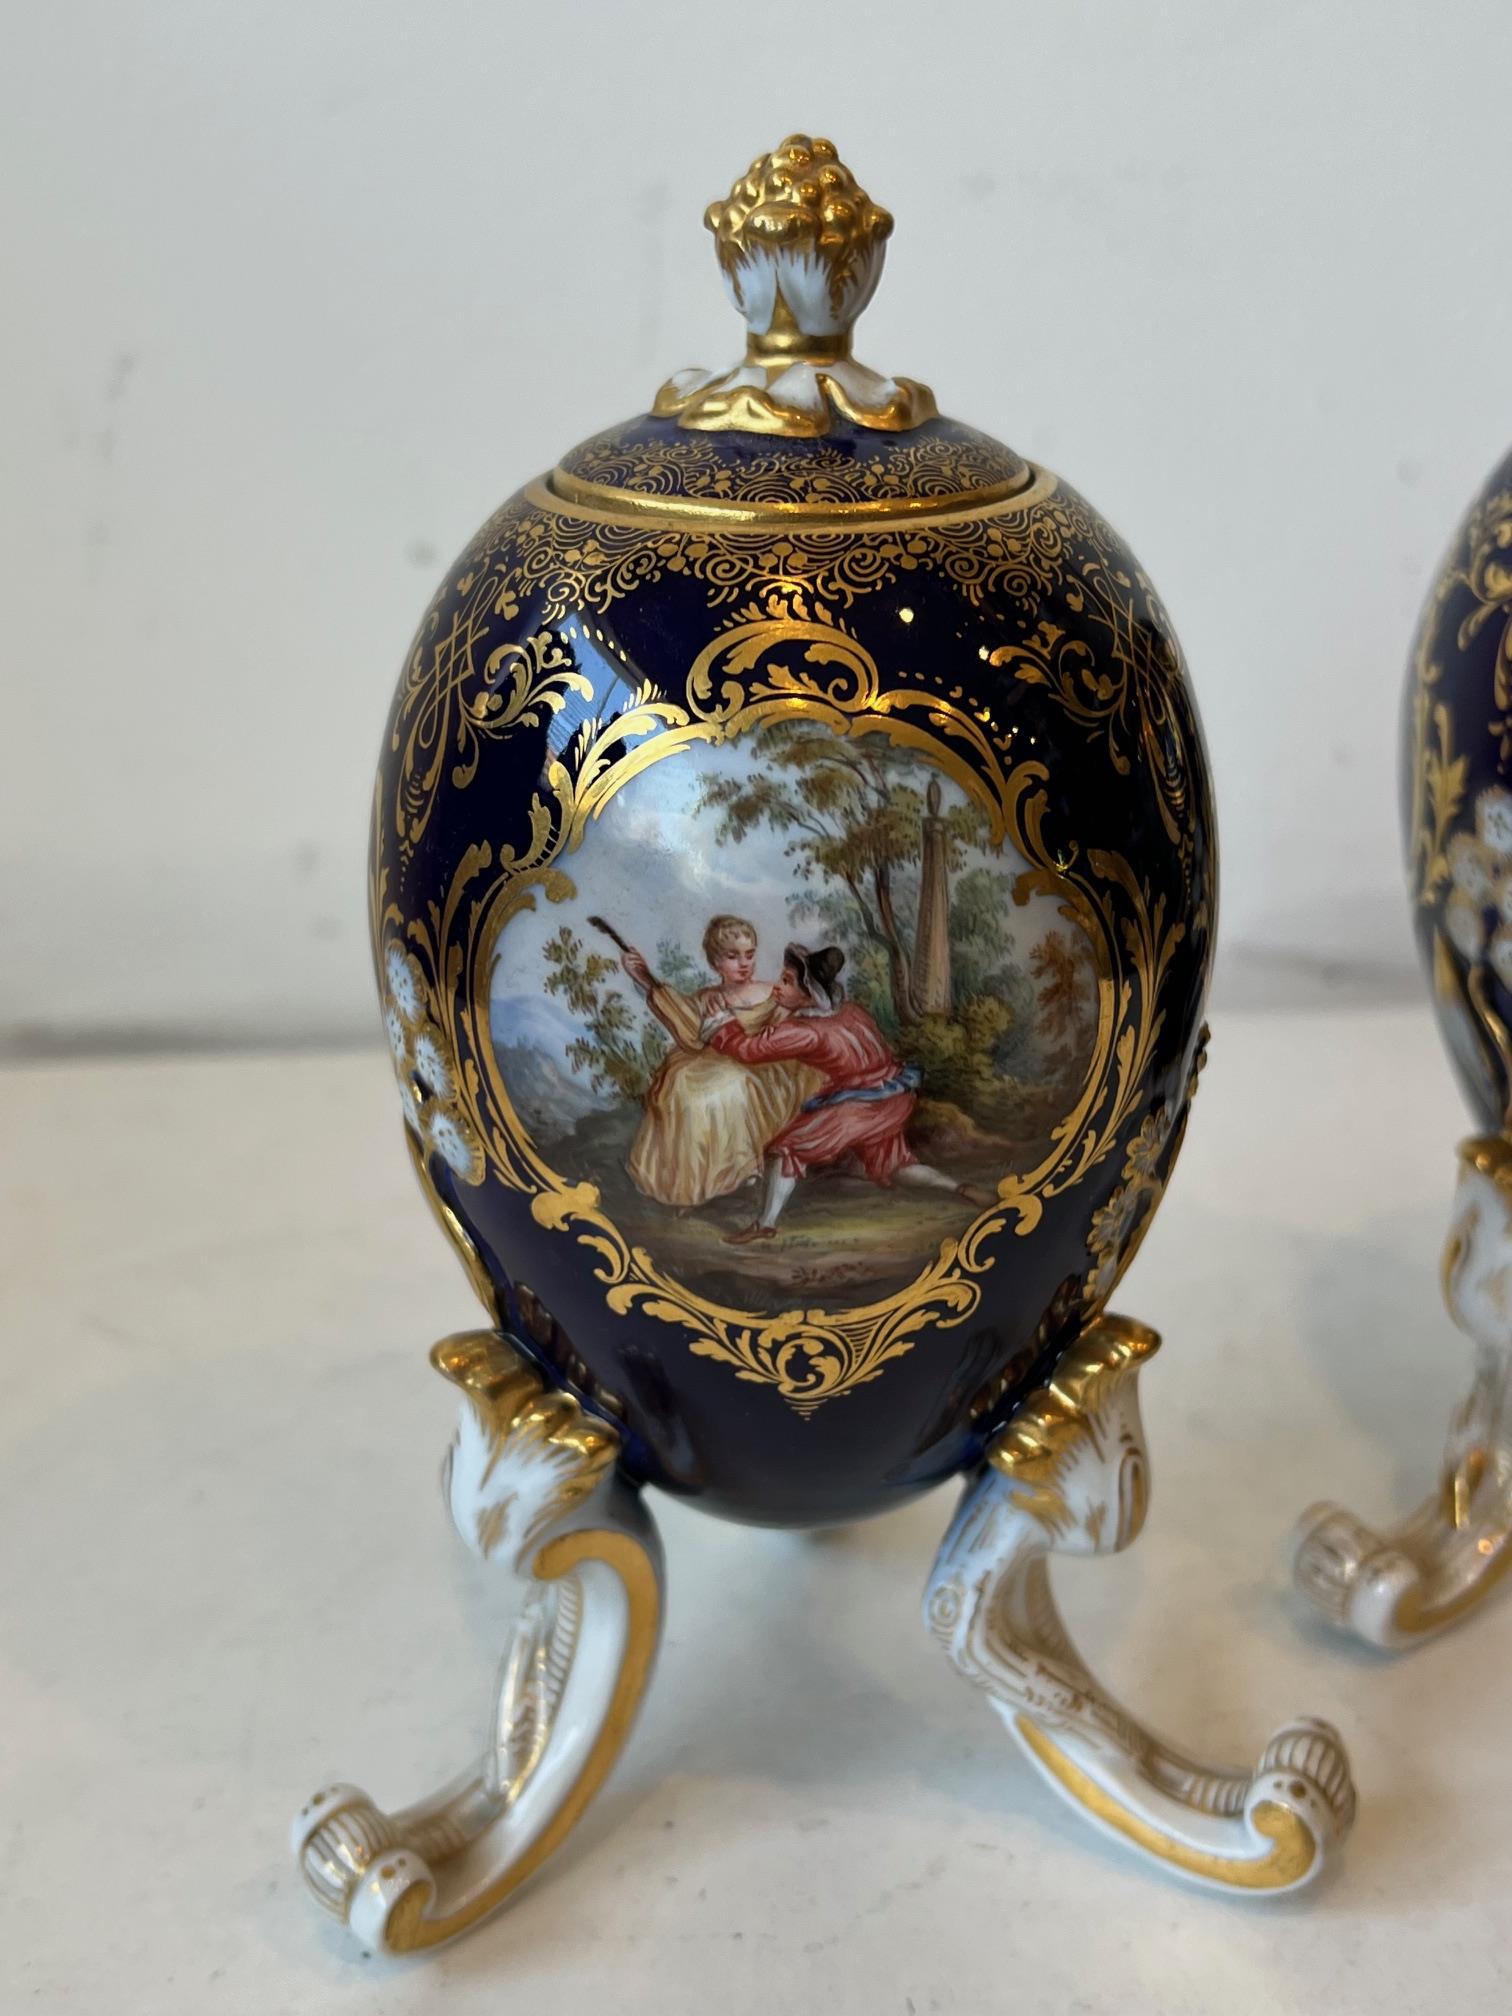 MEISSEN: A PAIR OF LATE 19TH / EARLY 20TH CENTURY PORCELAIN EGG SHAPED TEA CADDIES - Image 8 of 16